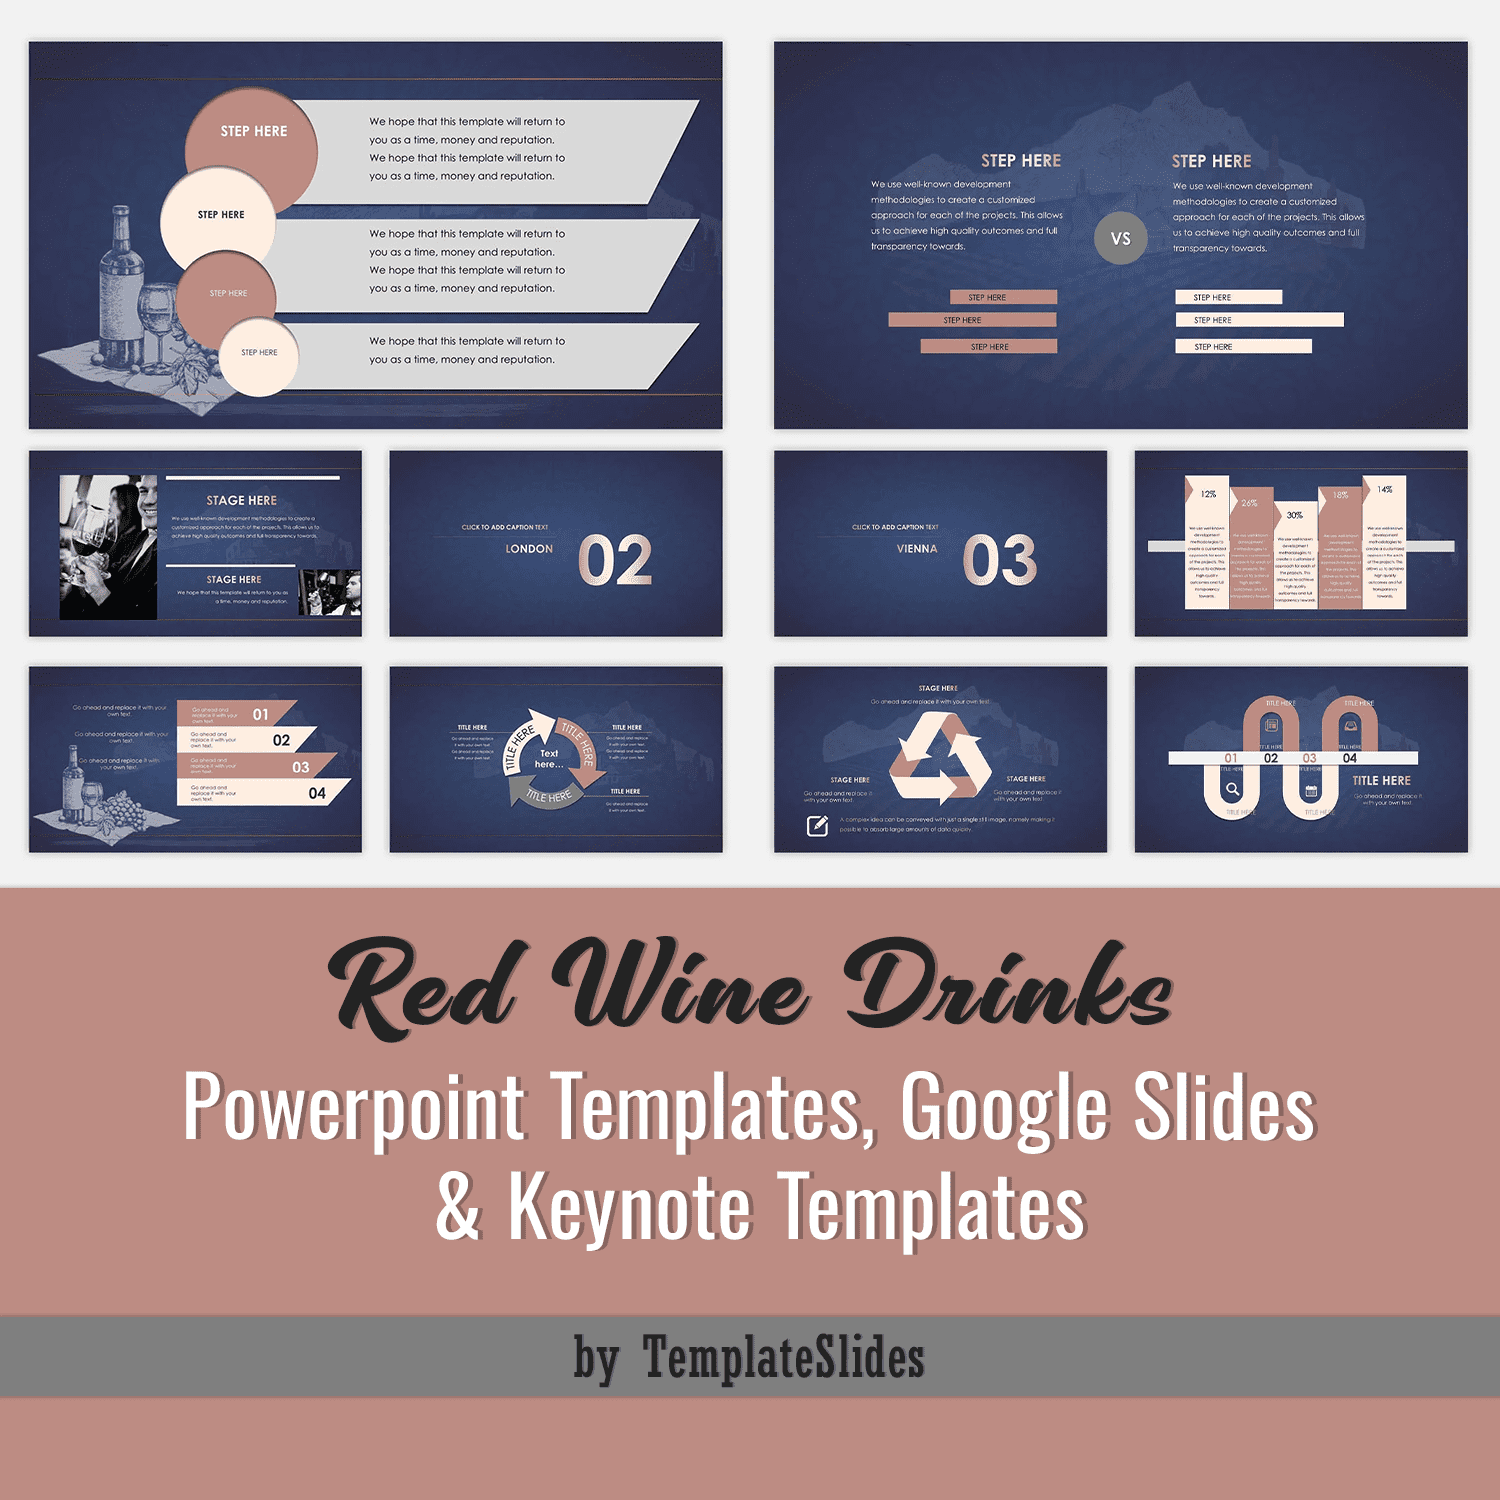 Red Wine Drinks Powerpoint Templates, Google Slides & Keynote Templates Cover.